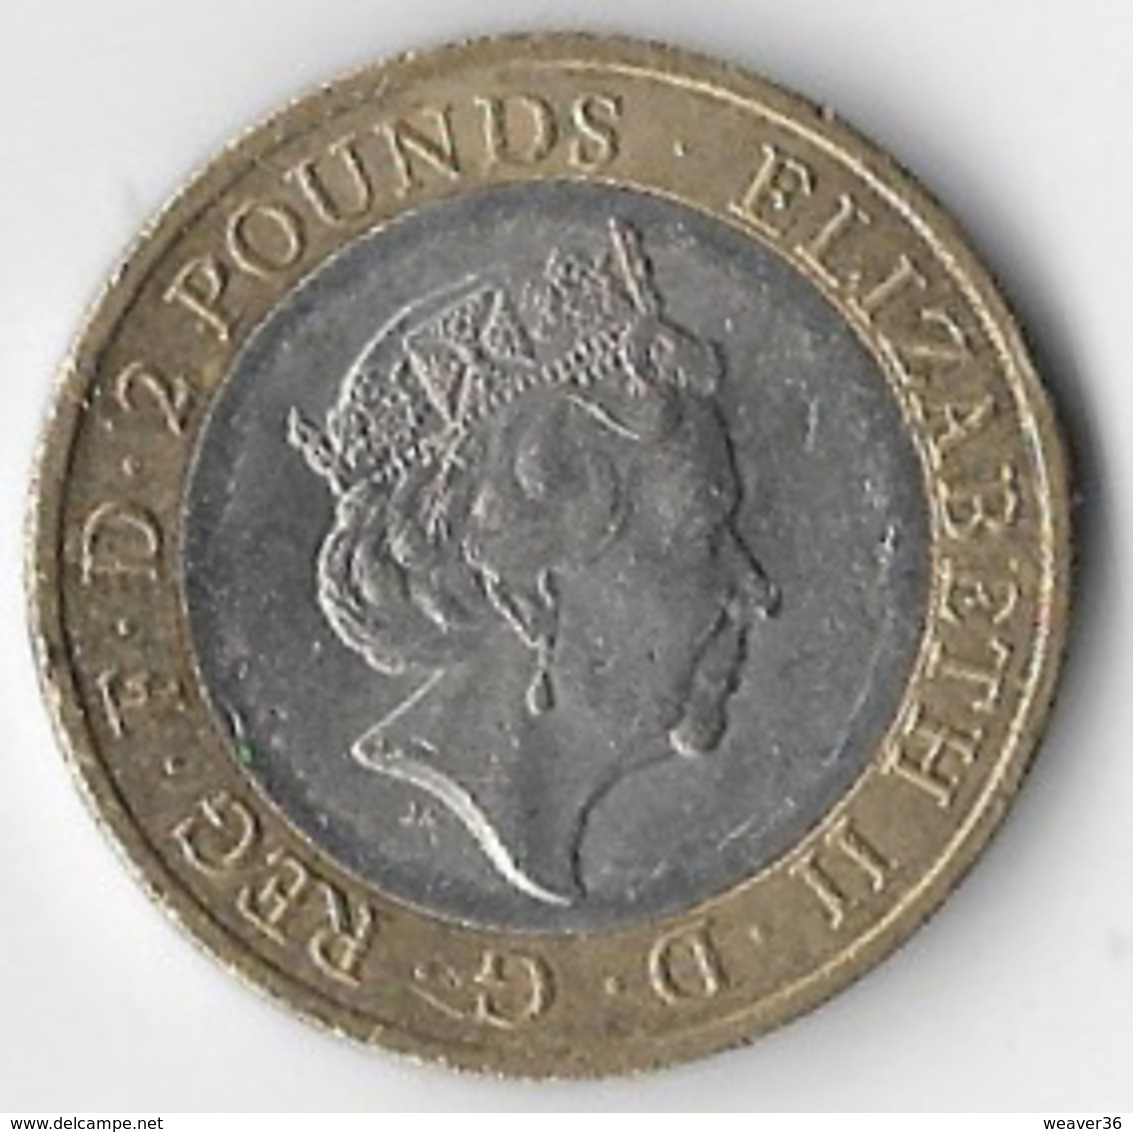 United Kingdom 2016 £2 Shakespeare Histories [C418/1D] - 2 Pounds